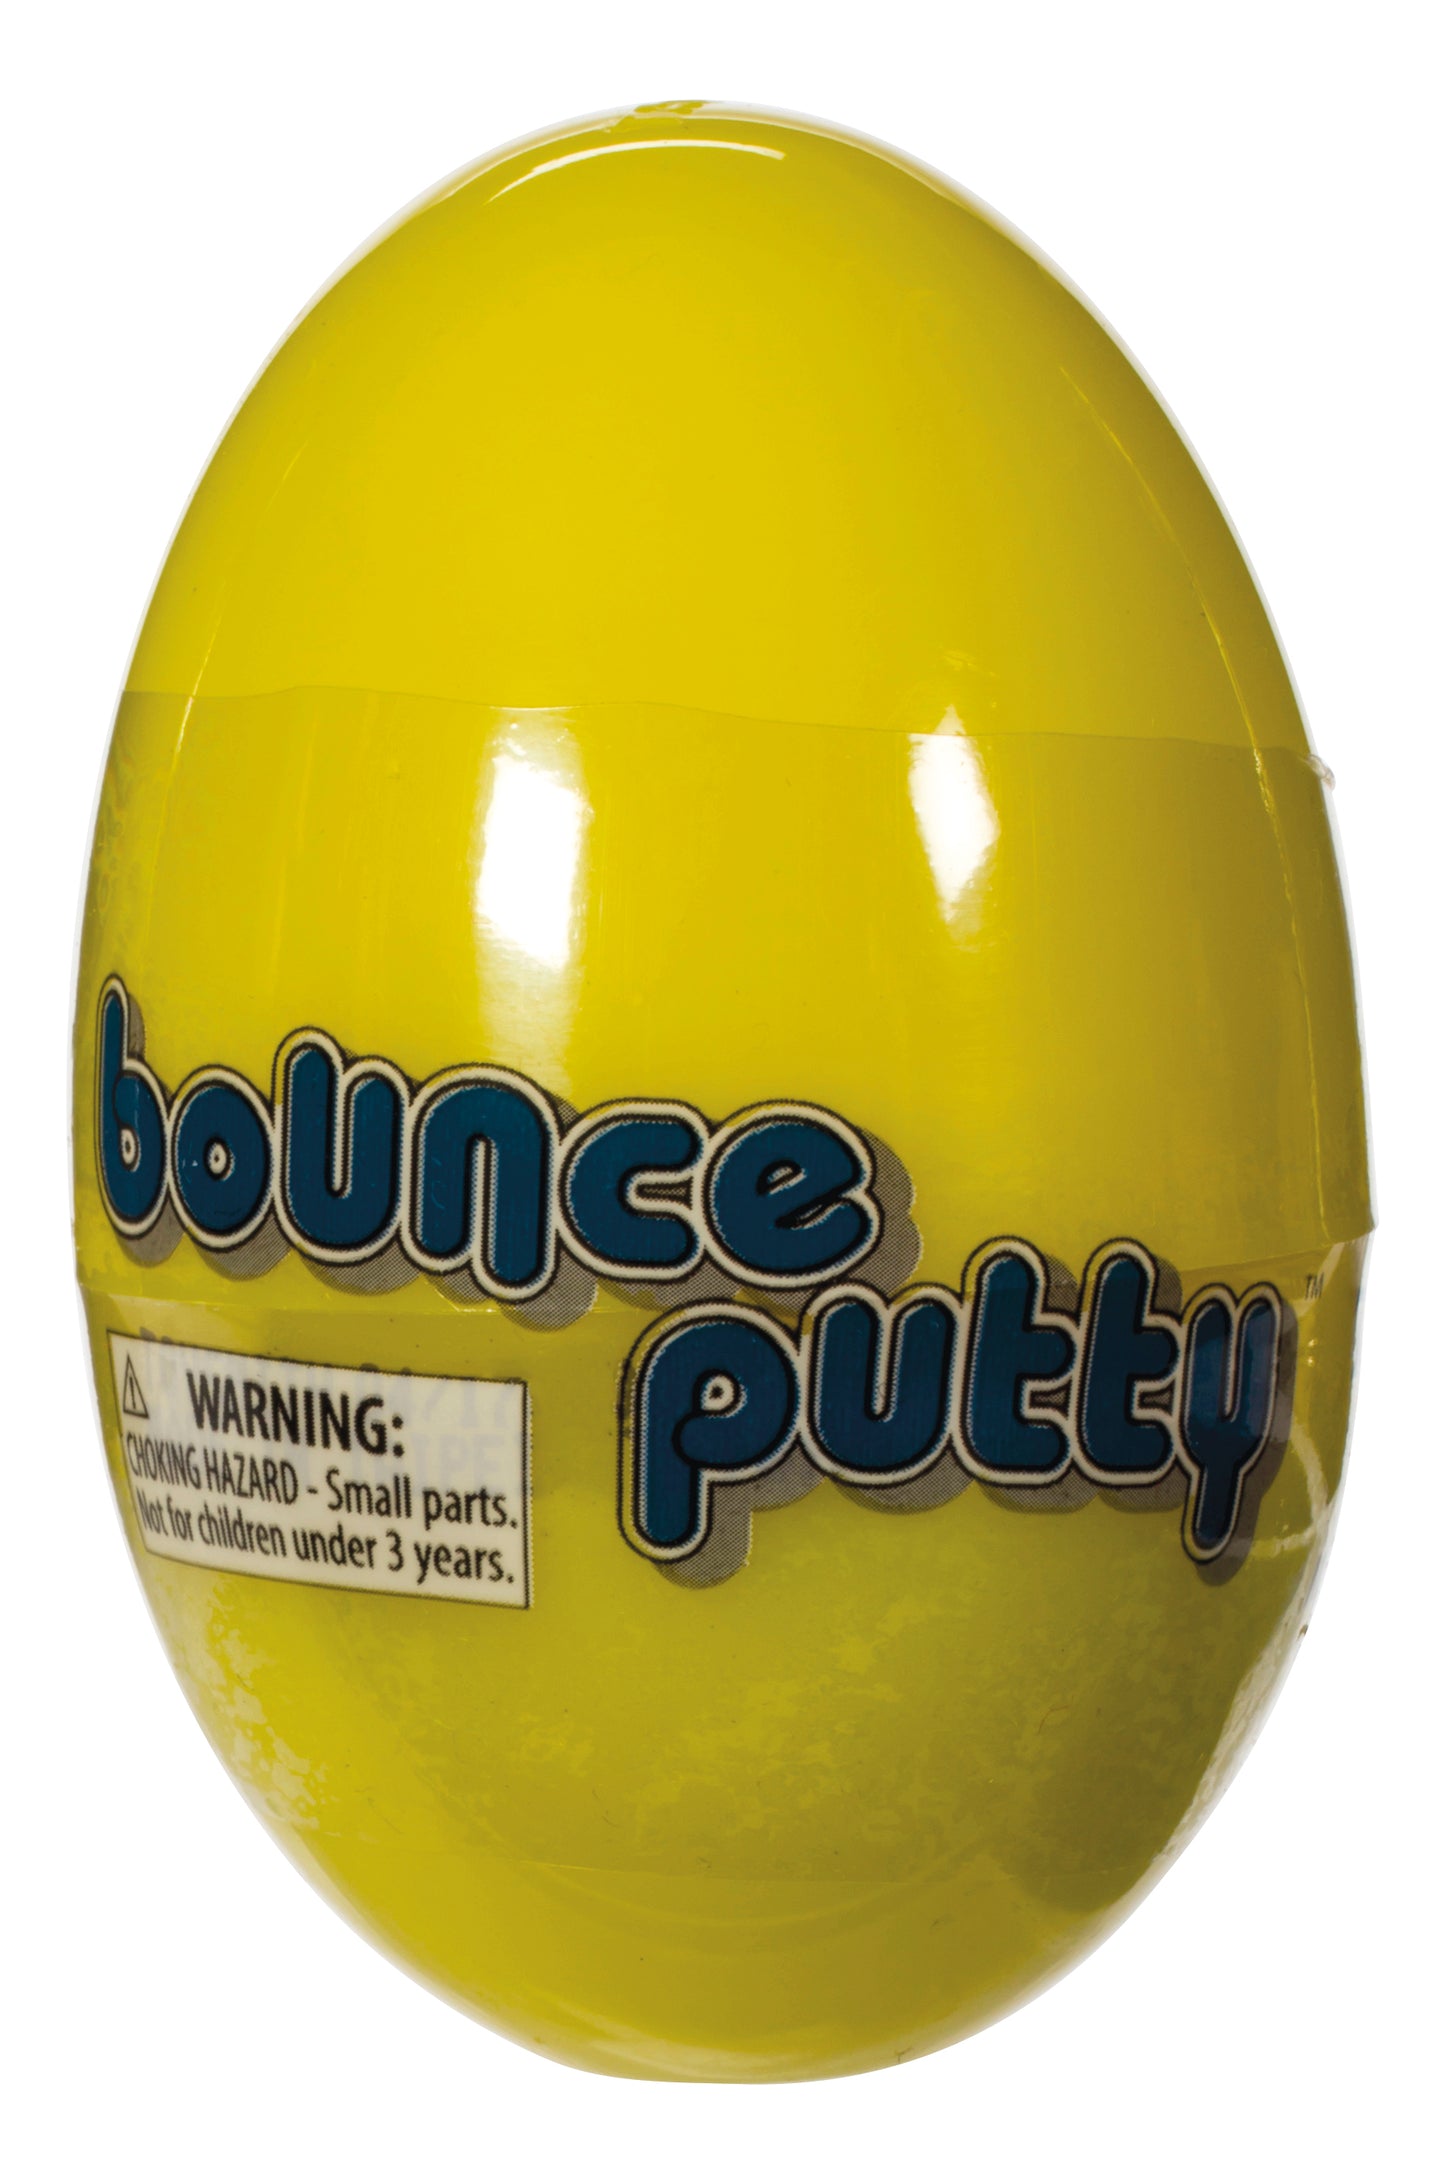 Yellow egg-shaped container of Bounce Putty